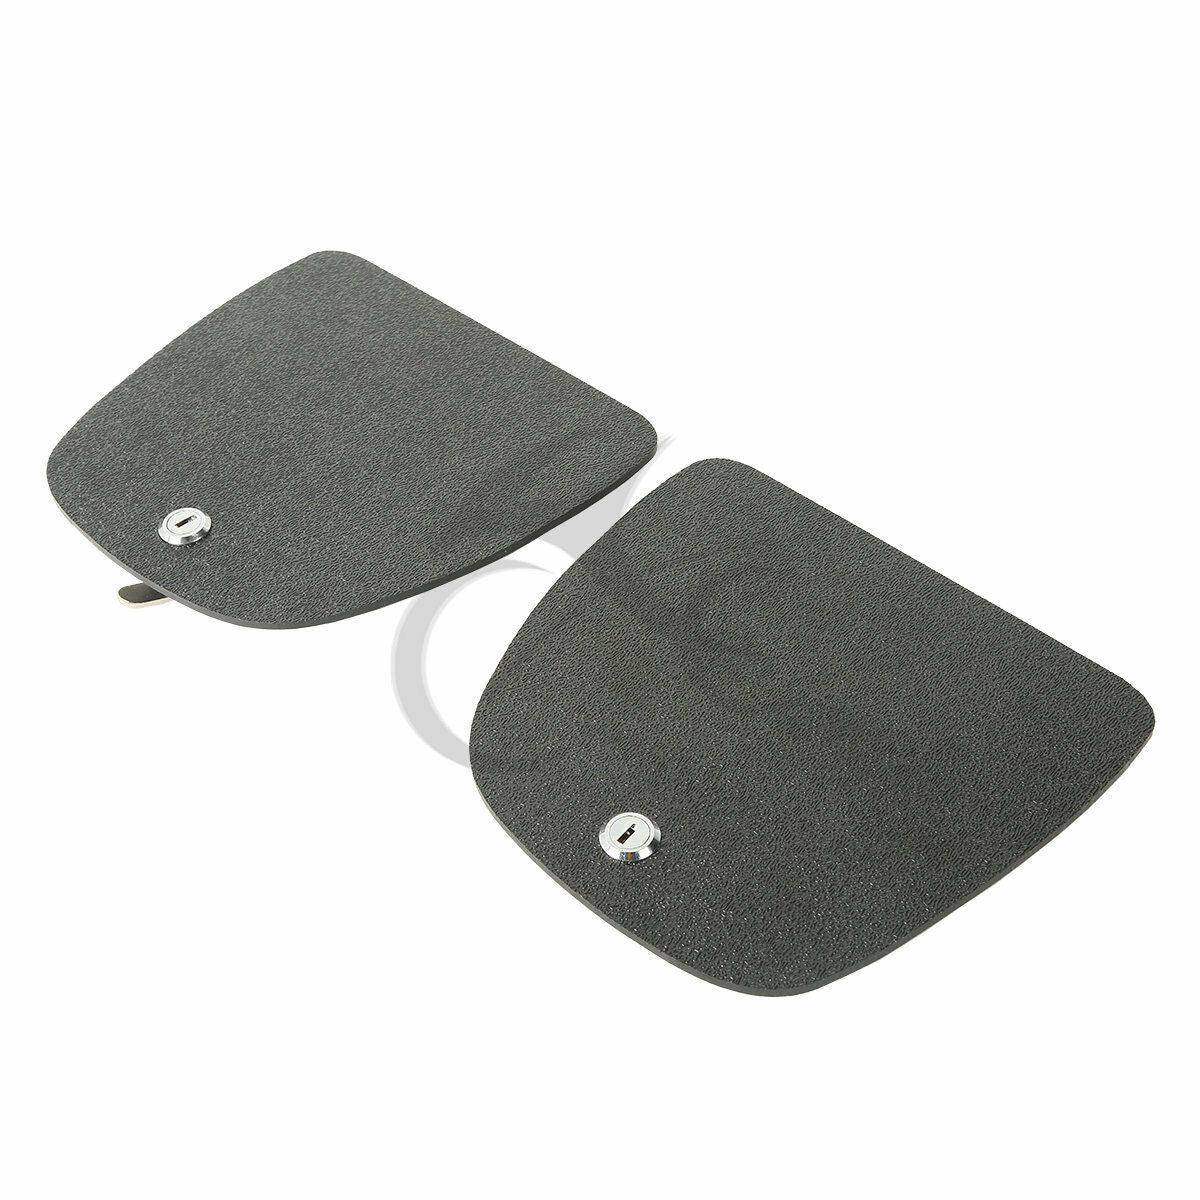 Black Lower Fairing Locking Glovebox Doors Fit For Harley Touring models 05-2013 - Moto Life Products